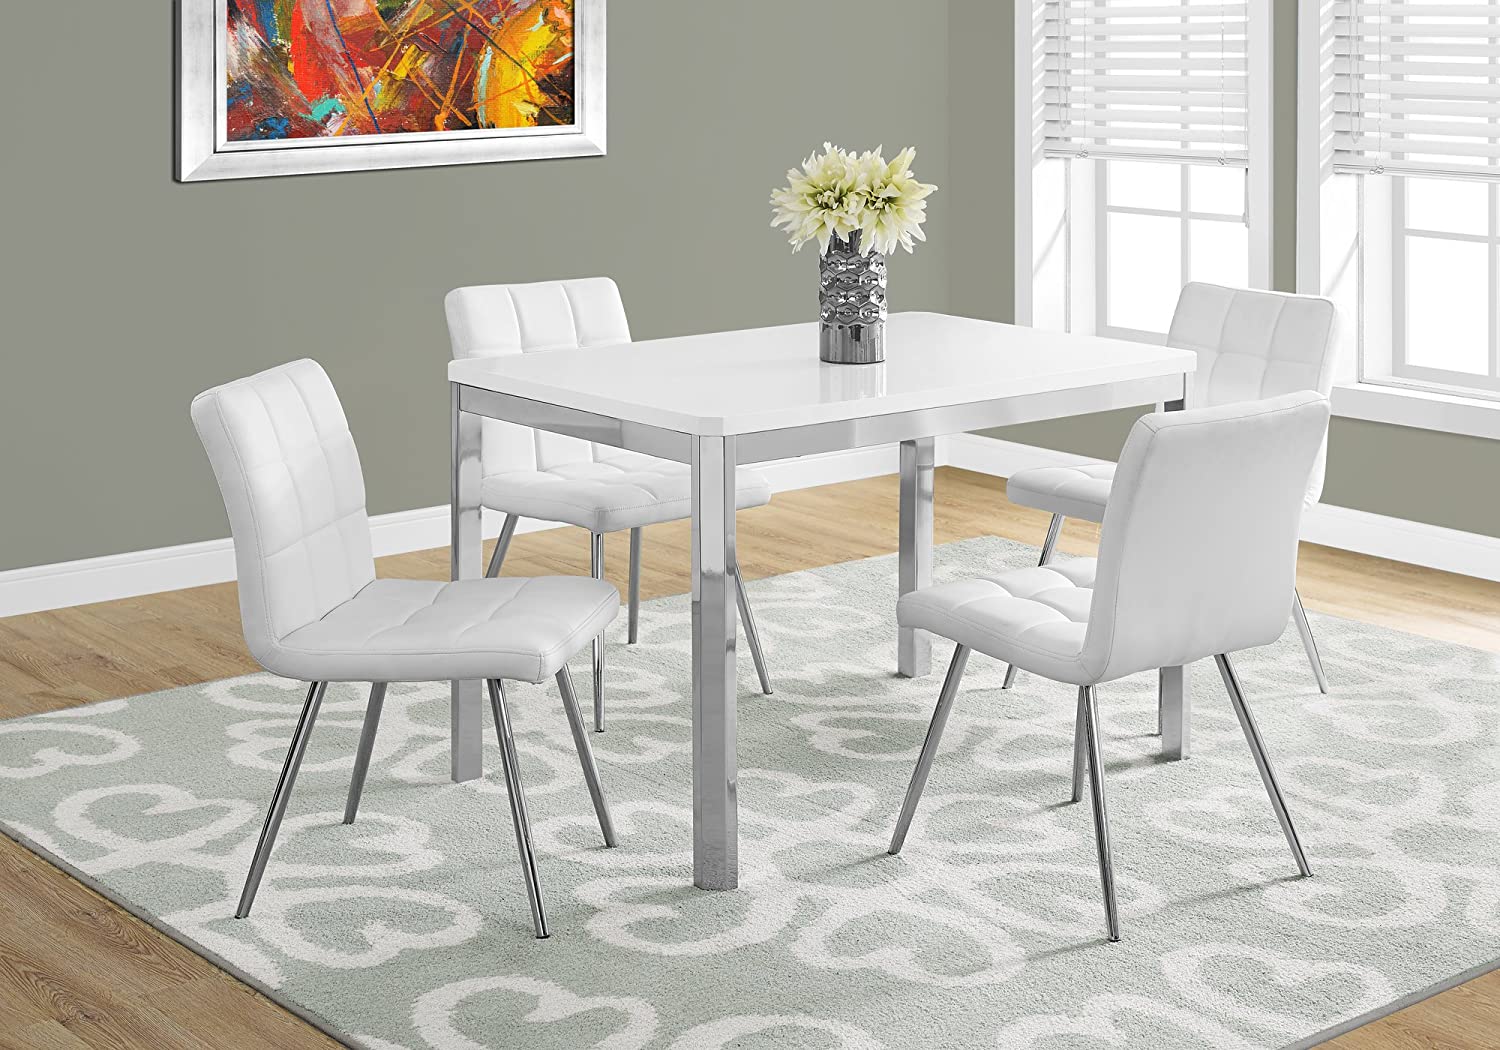 Monarch Specialties 32-Inch x 48-Inch White & Chrome Dining Table